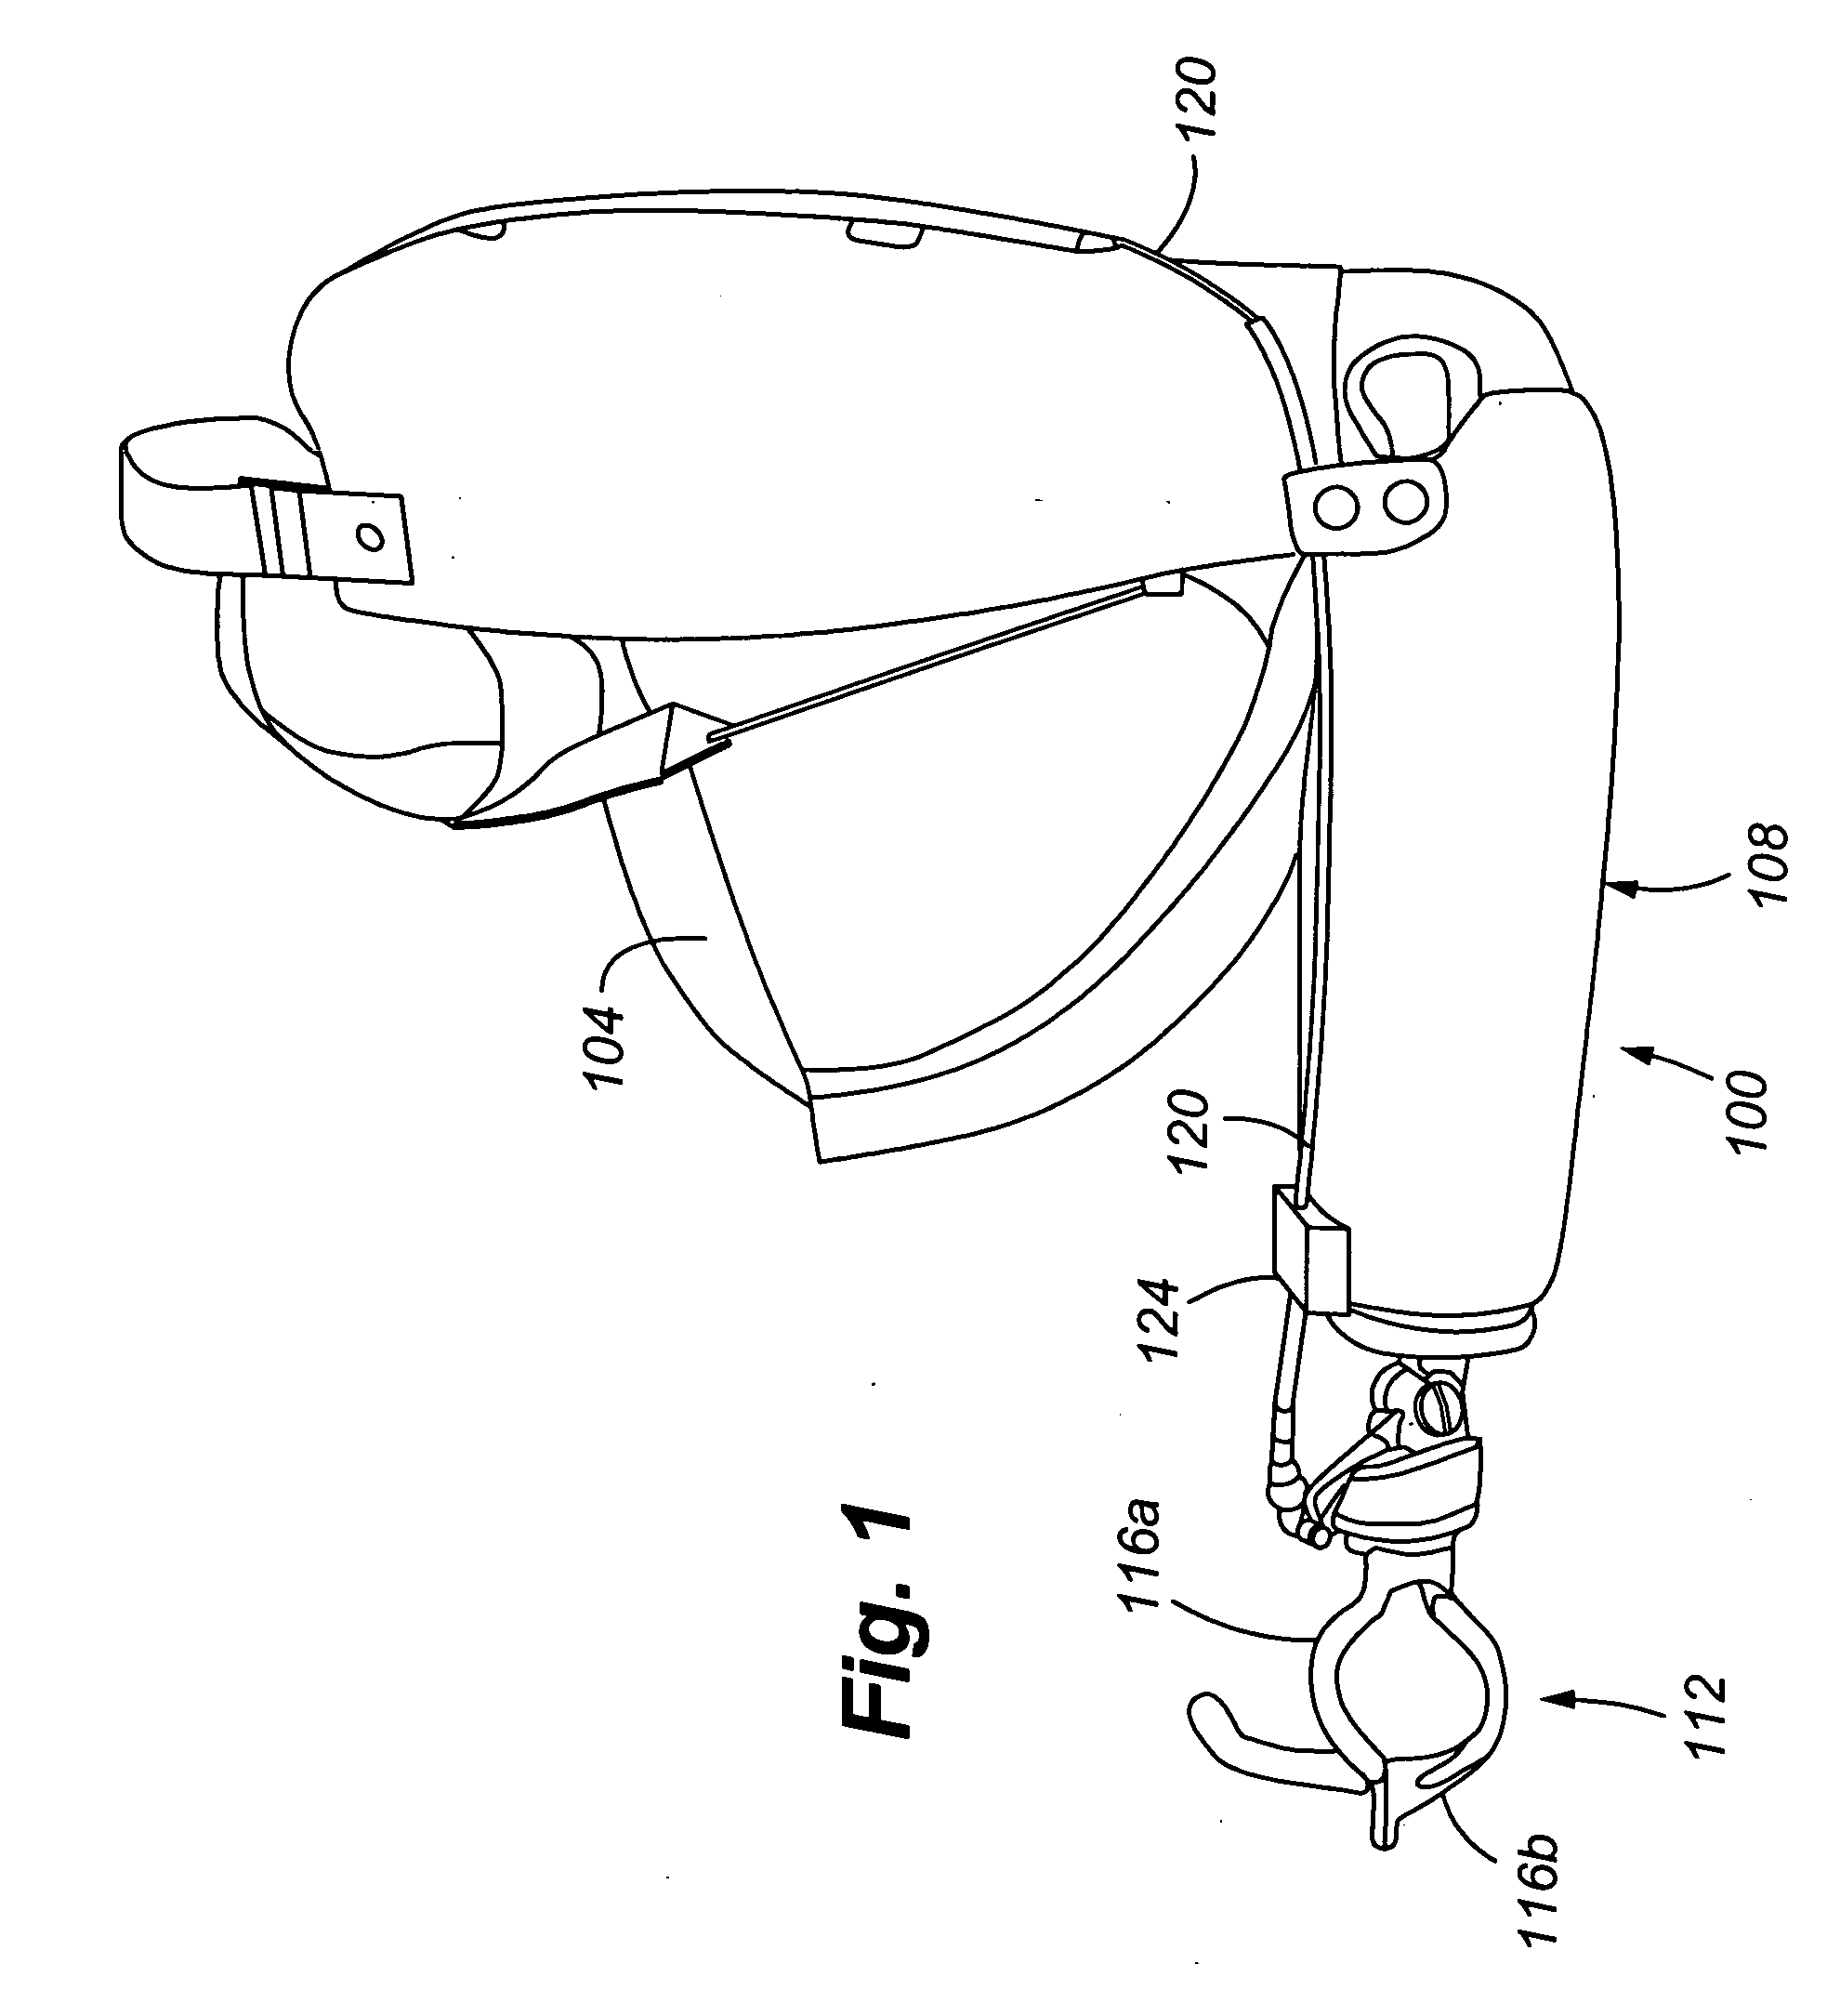 Cable lock device for prosthetic and orthotic devices